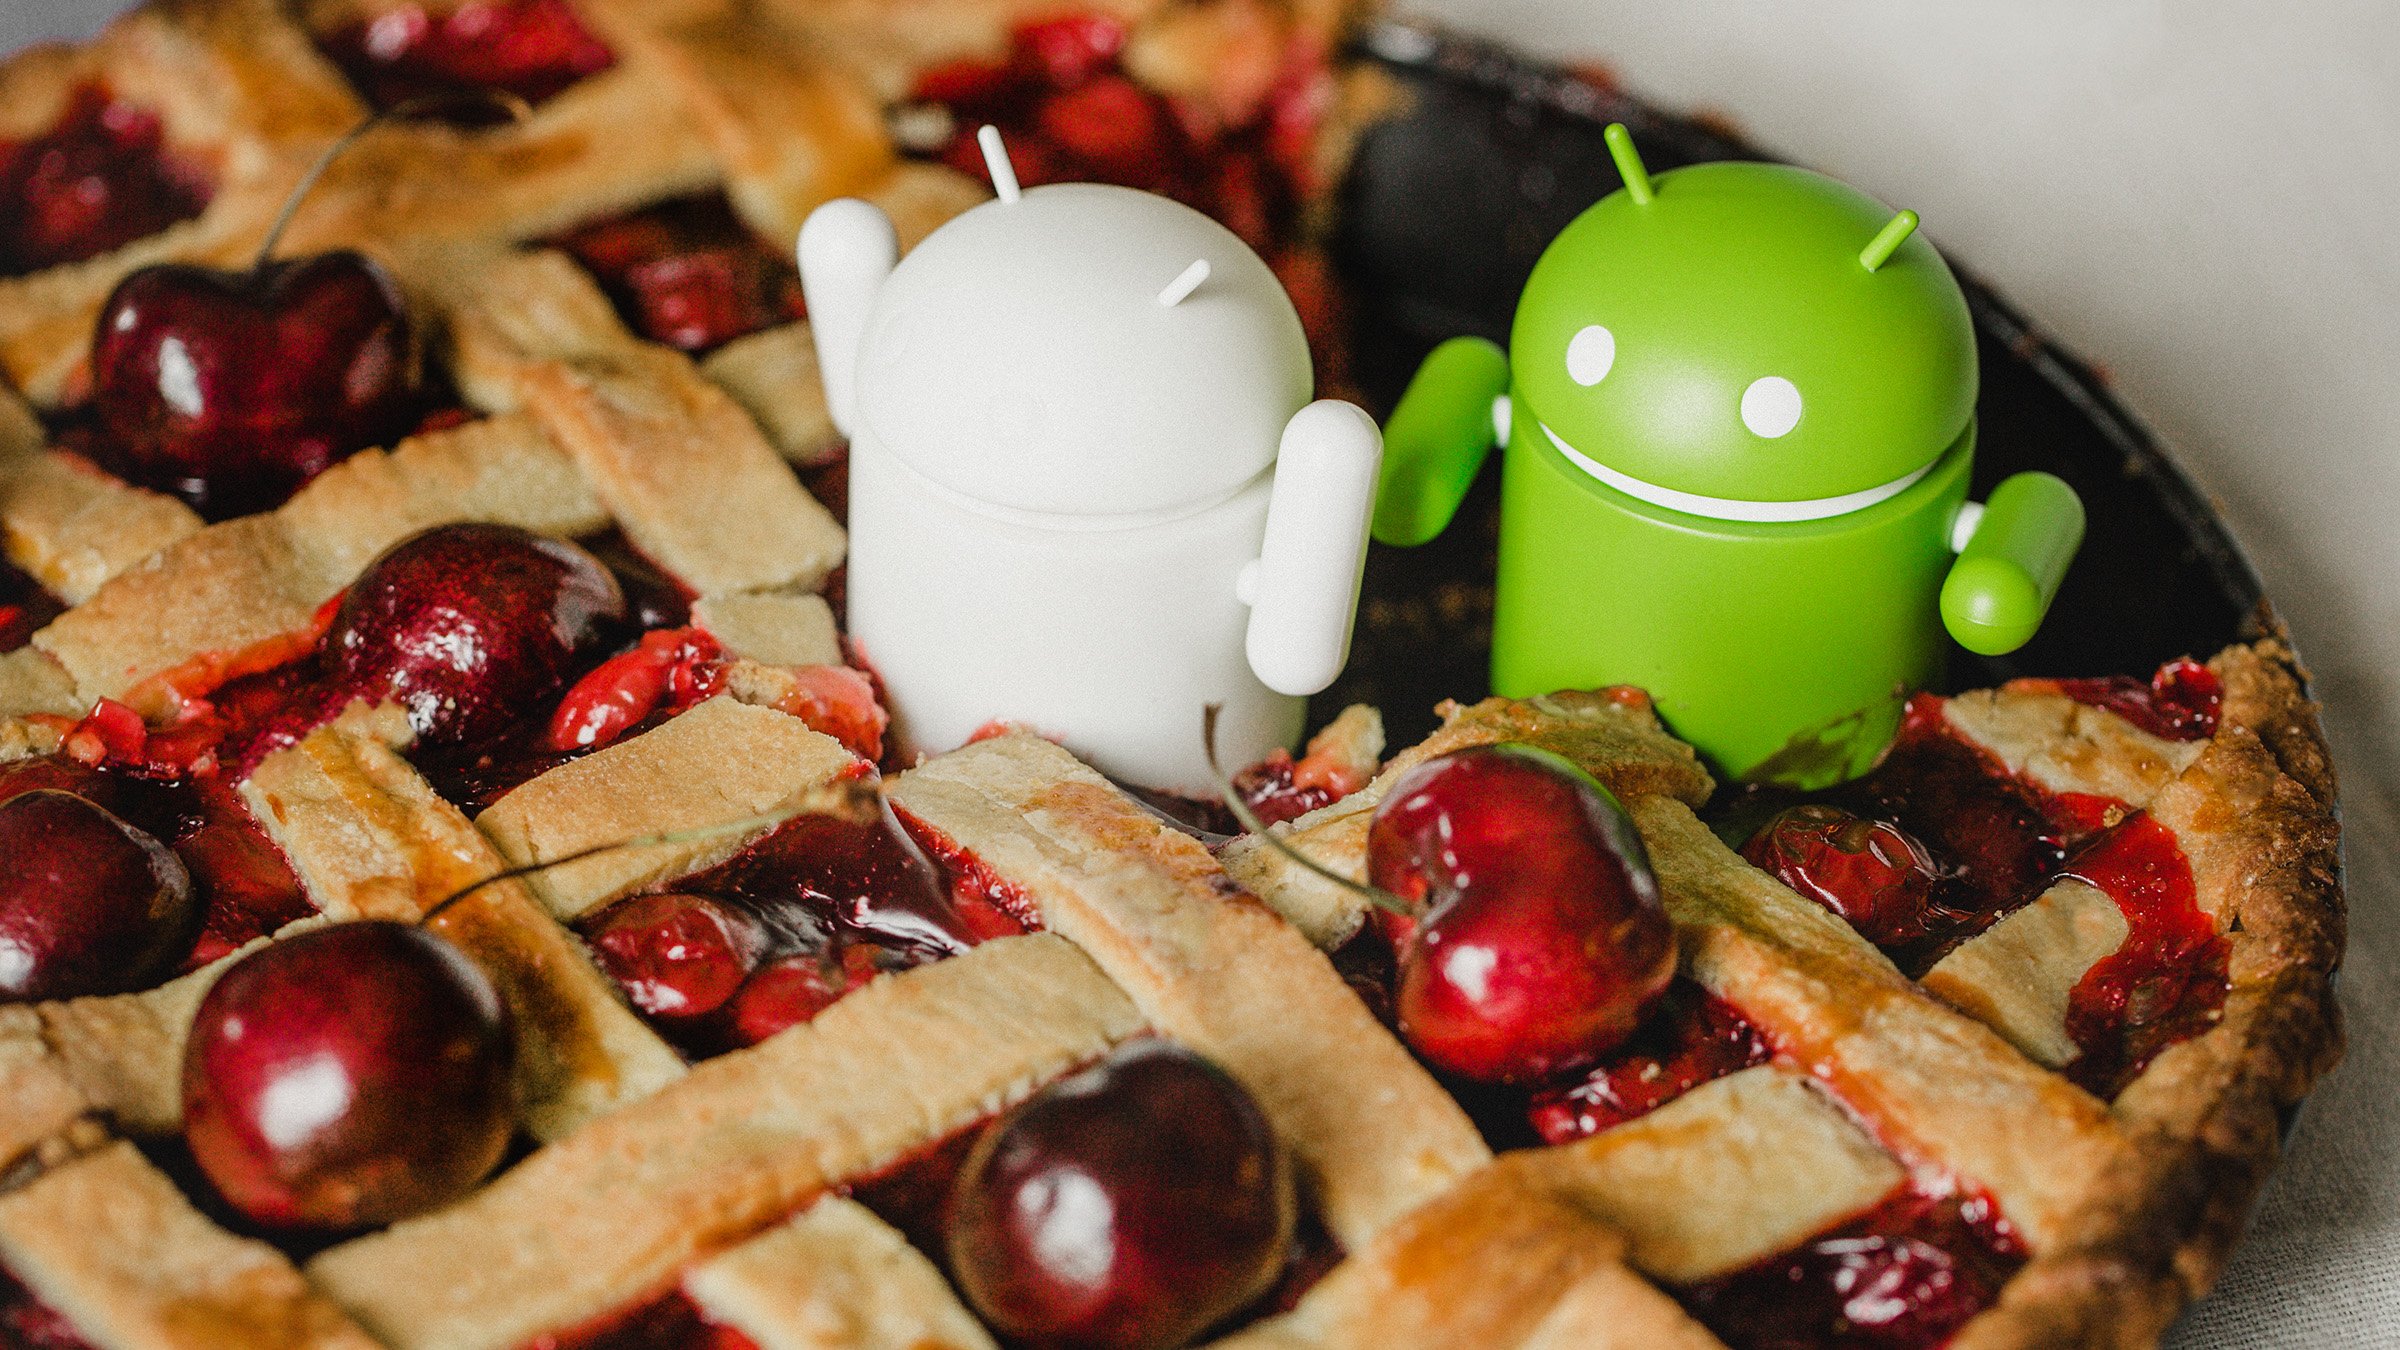 S rooted: Google blocks call recordings on Android 9 Pie